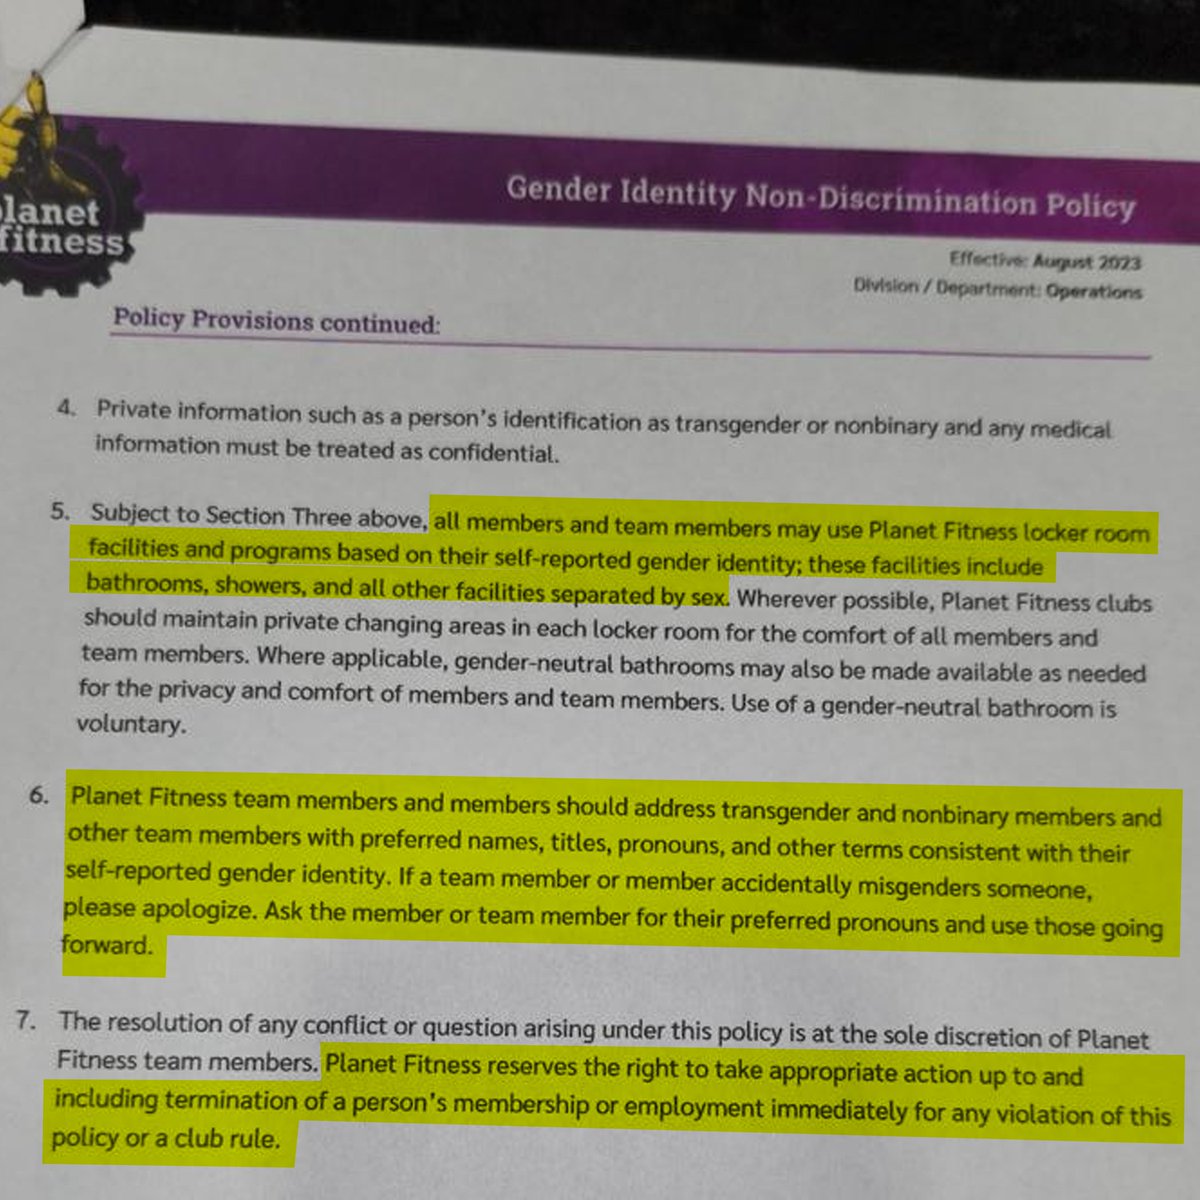 SCOOP: A source in Planet Fitness tells us he was unexpectedly asked to sign a document last week when he showed up to work one day. The document instructs employees to let people use any facility based on a person's self-reported gender identity. It also makes employees pledge